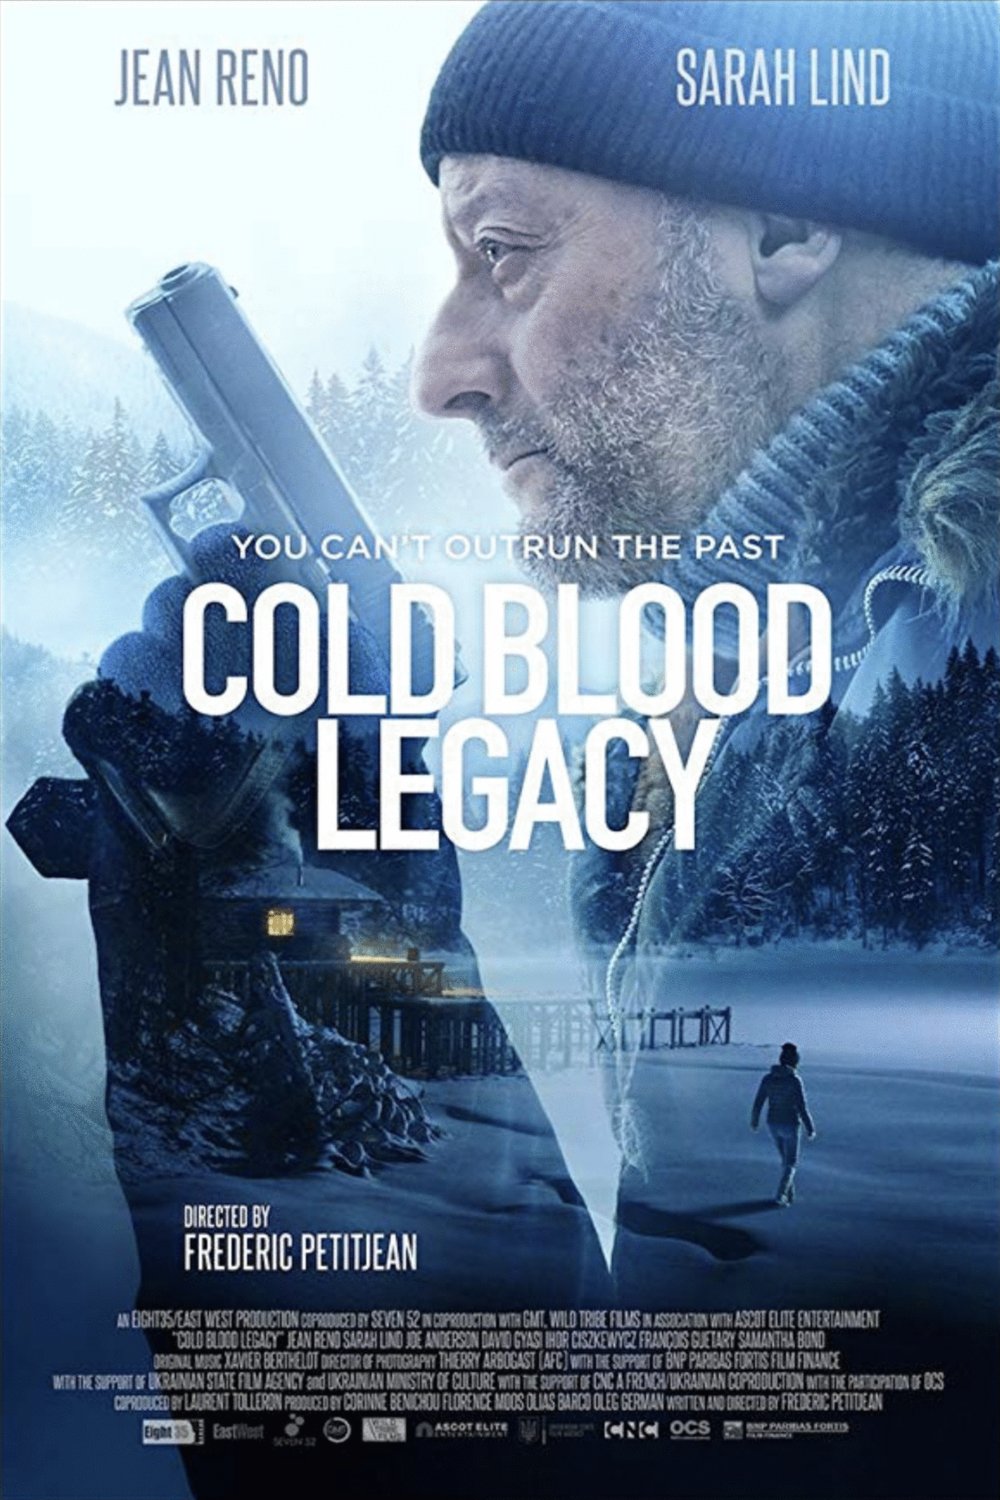 Poster of the movie Cold Blood Legacy